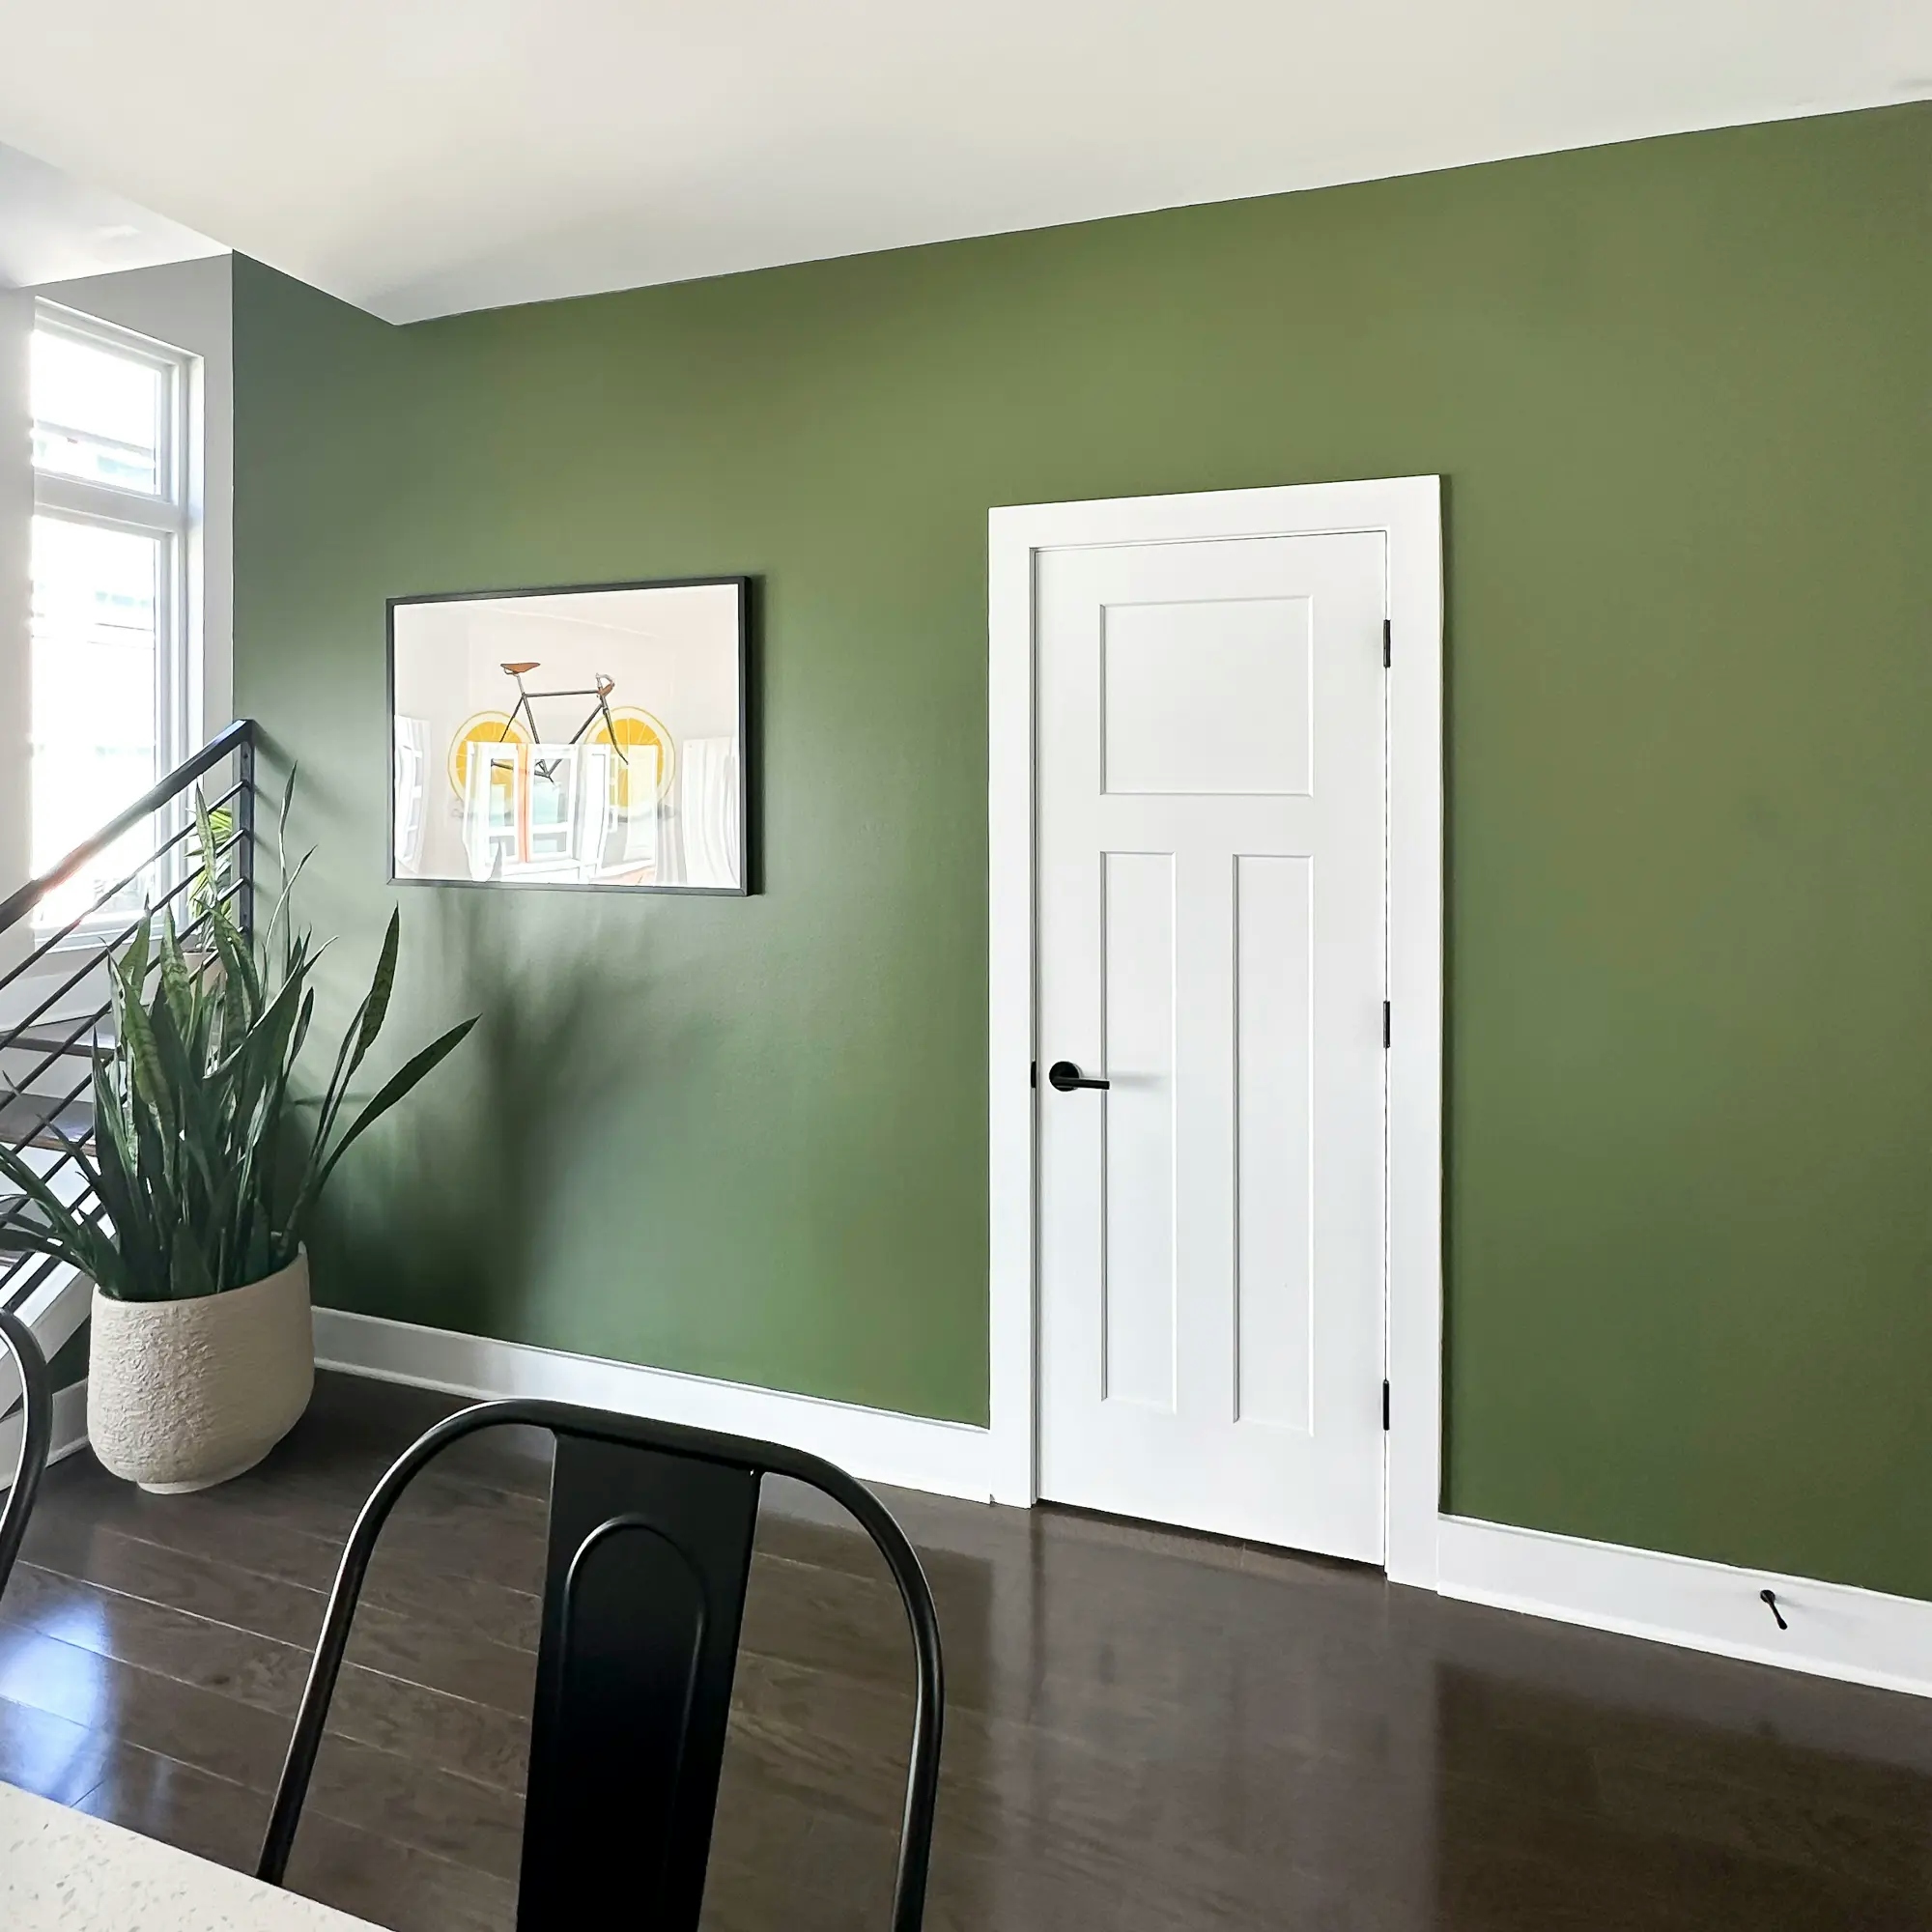 “We used Craftwork to repair and paint the accent wall in our kitchen, and we're very happy with it.”